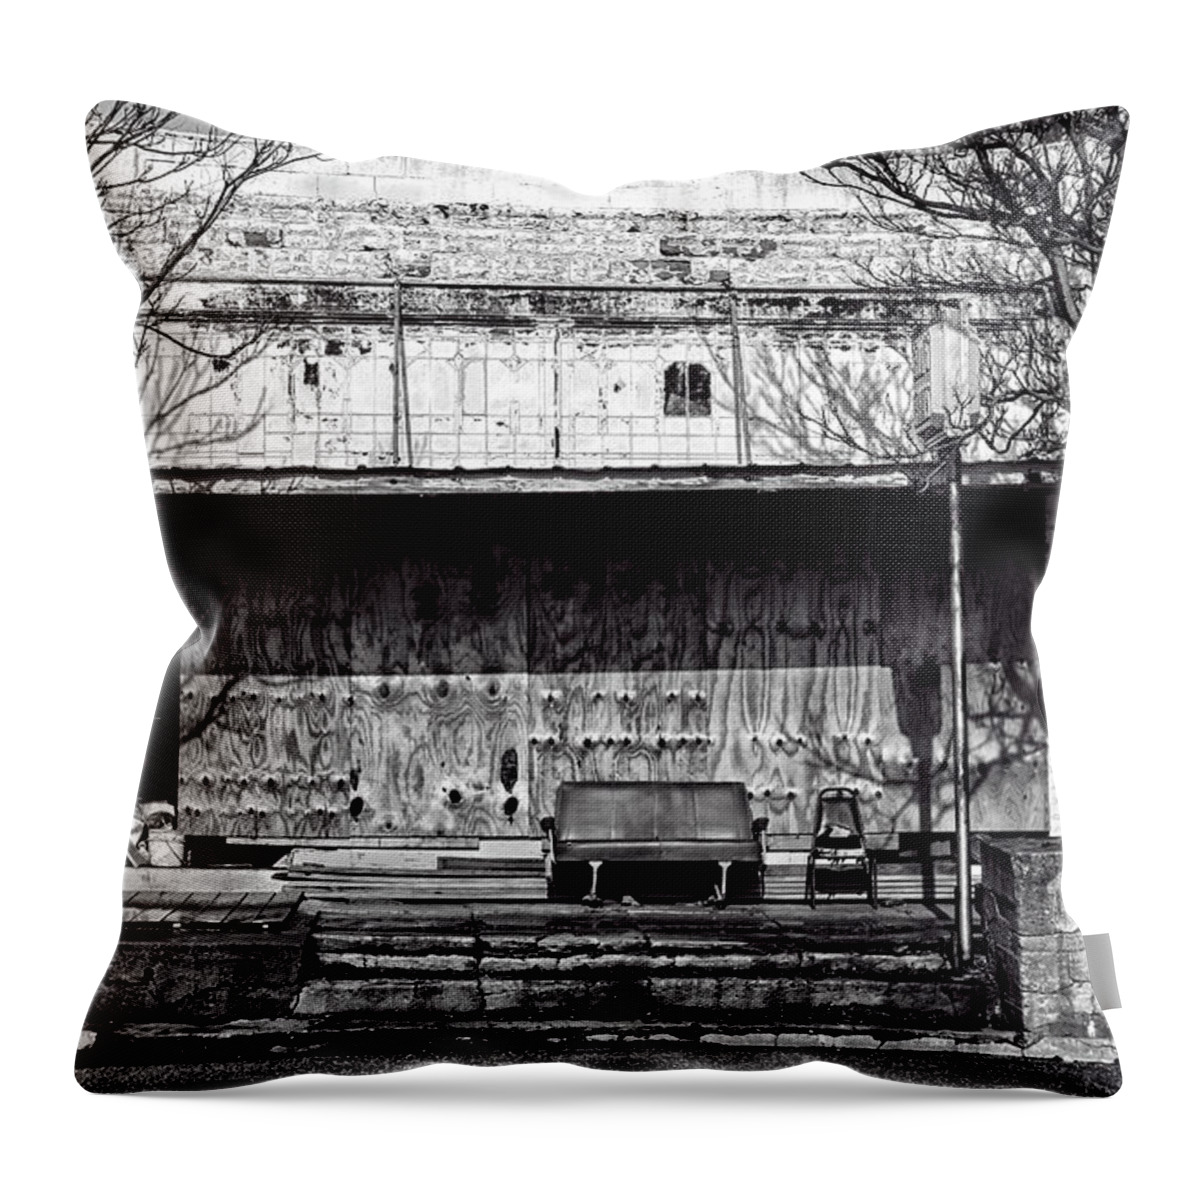 Ceramics Throw Pillow featuring the photograph Ceramics in Maywood by Steve Sullivan